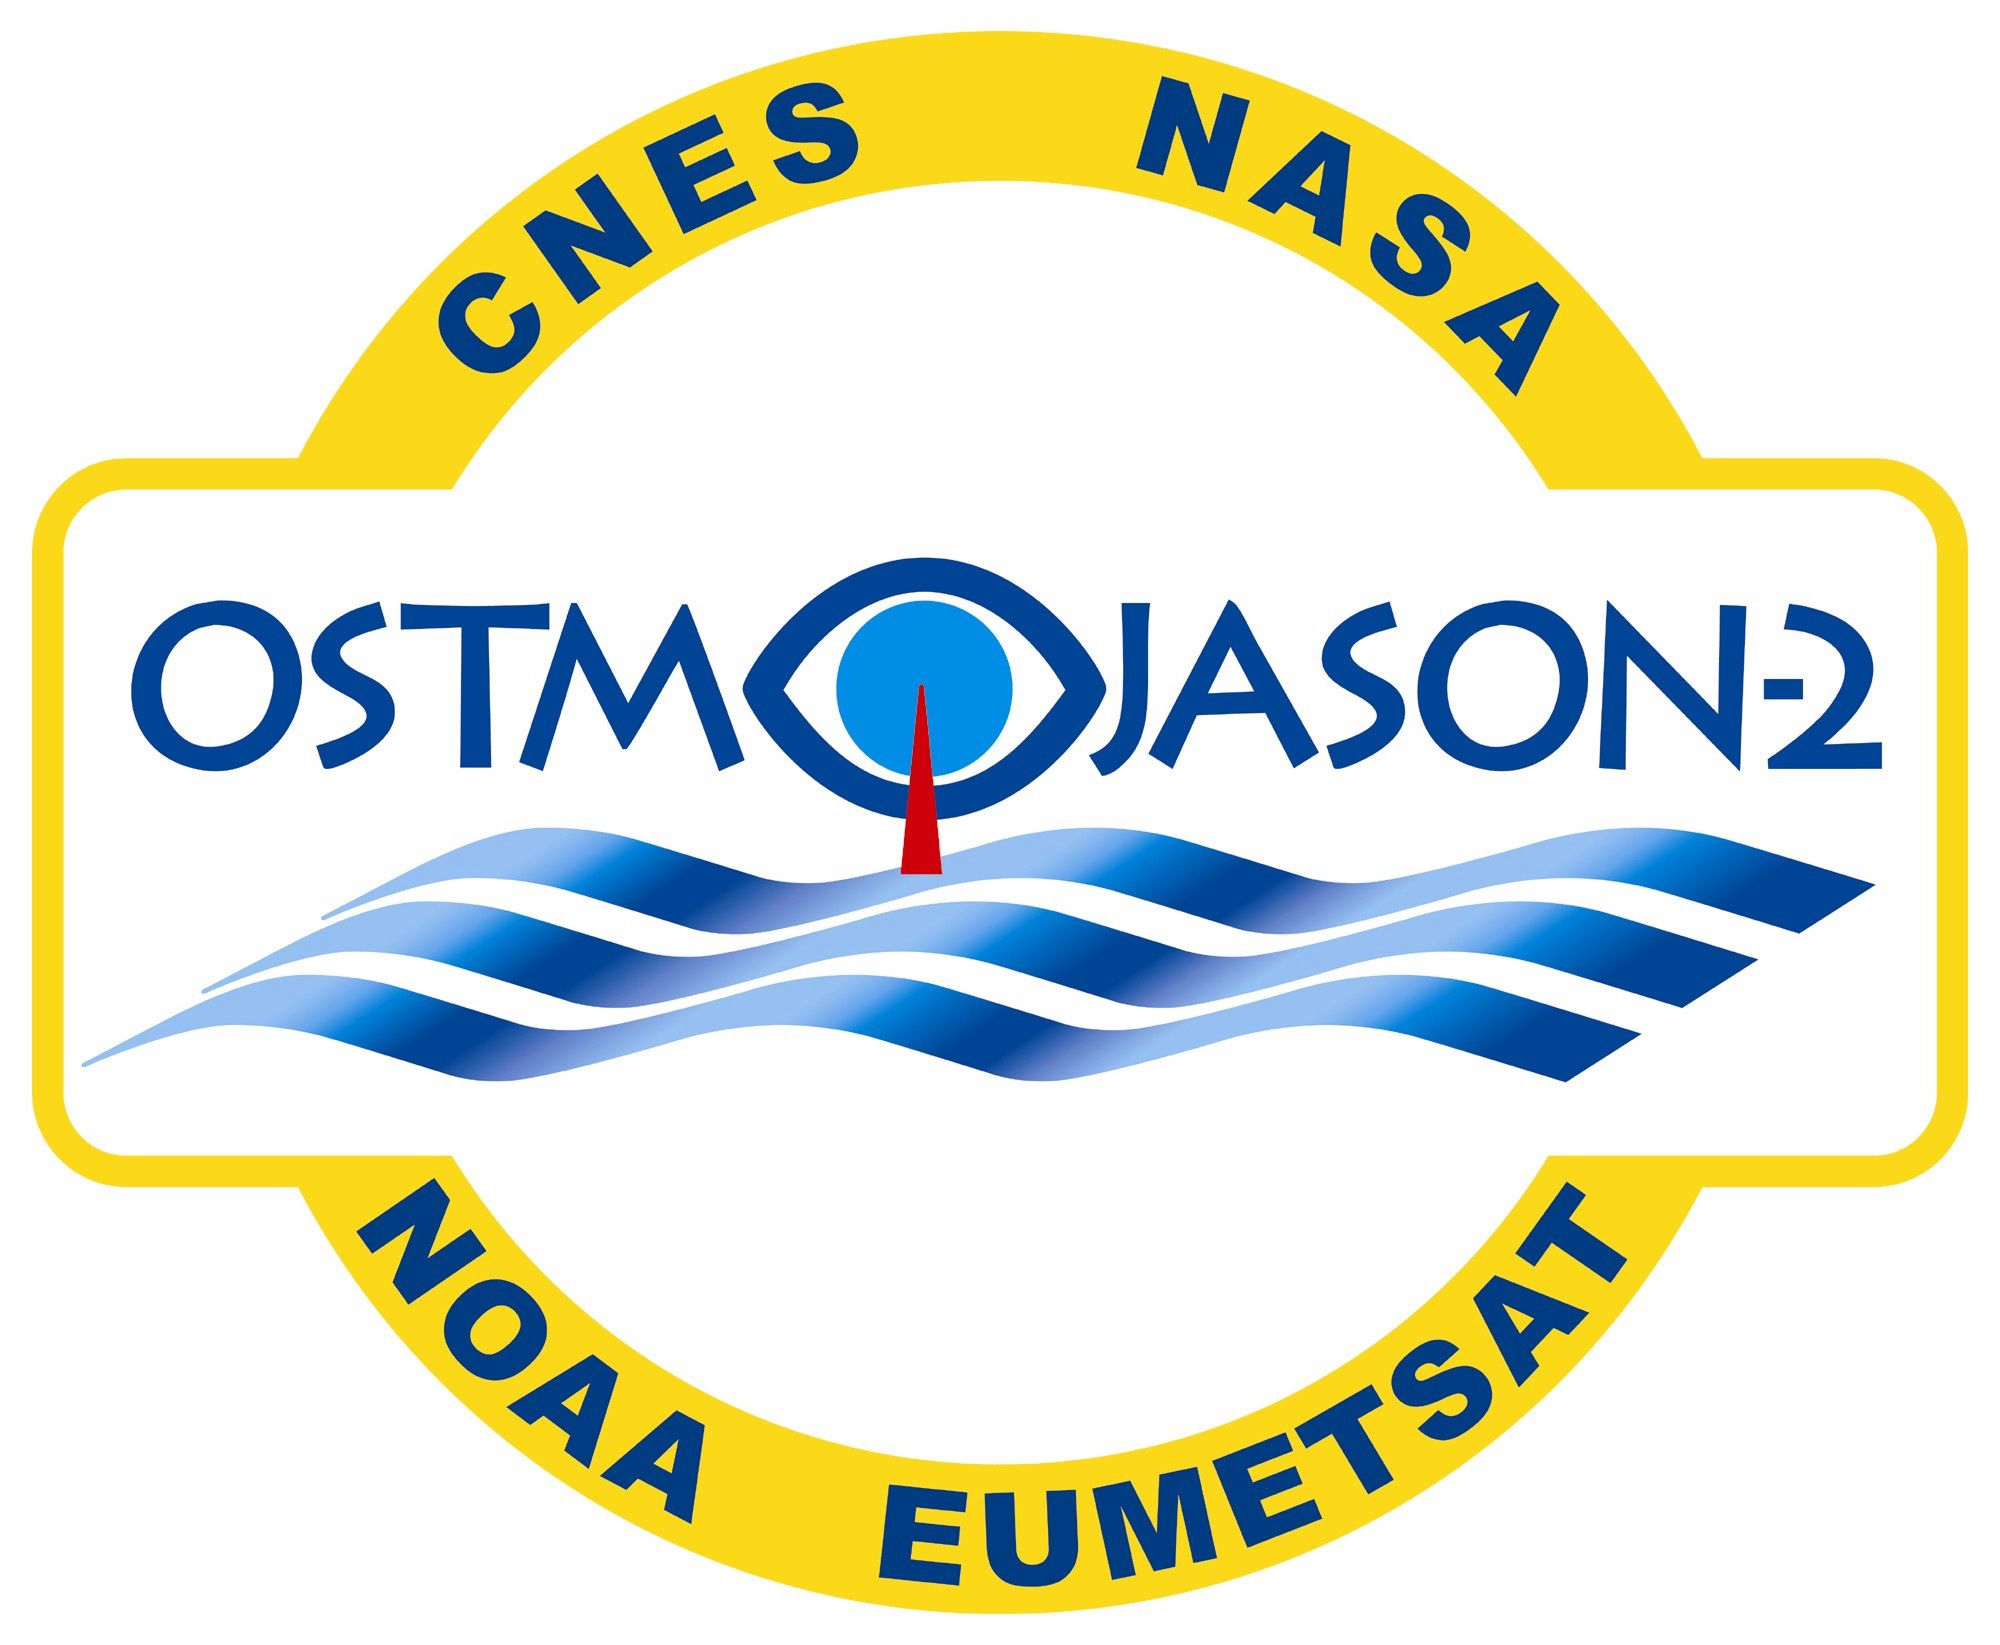 Jason-2 Mission Logo showing the names of the mission participants: NASA, CNES (French Space Agency), NOAA, EUMETSAT